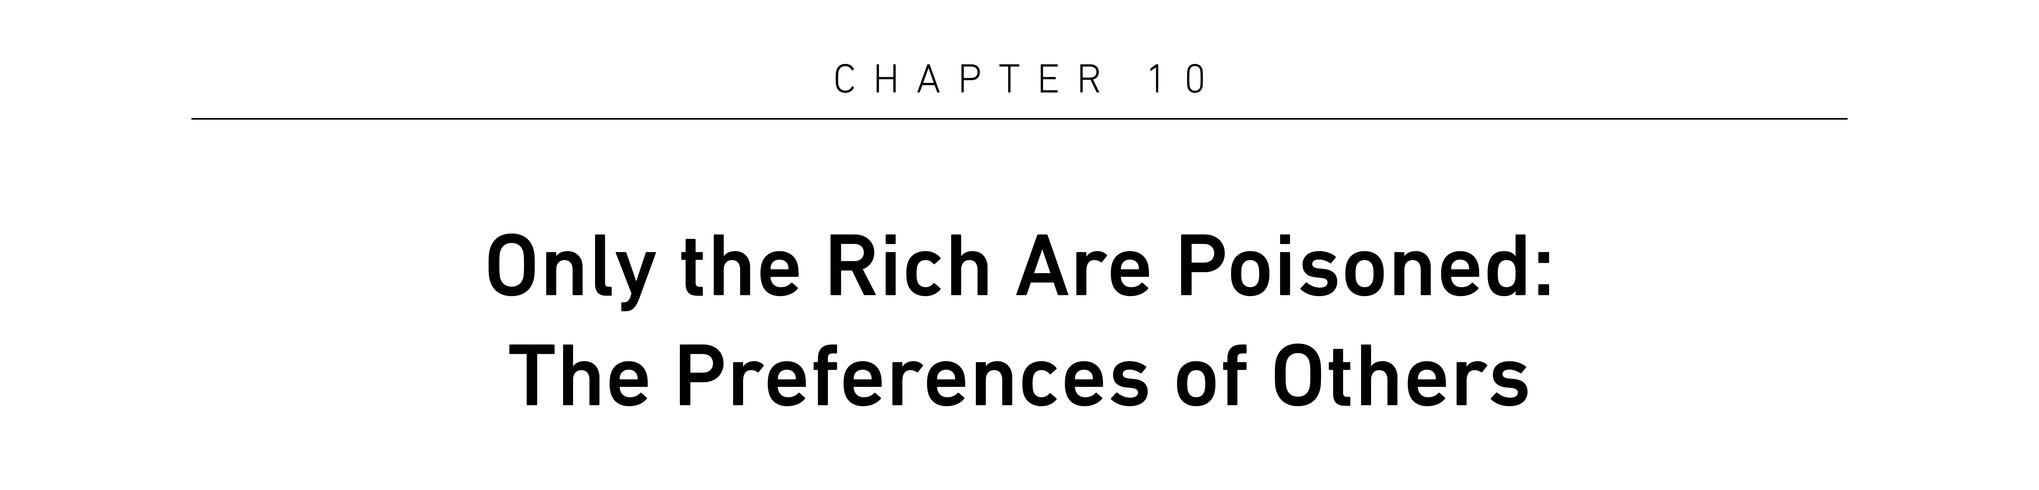 Chapter 10 Only the Rich Are Poisoned: The Preferences of Others